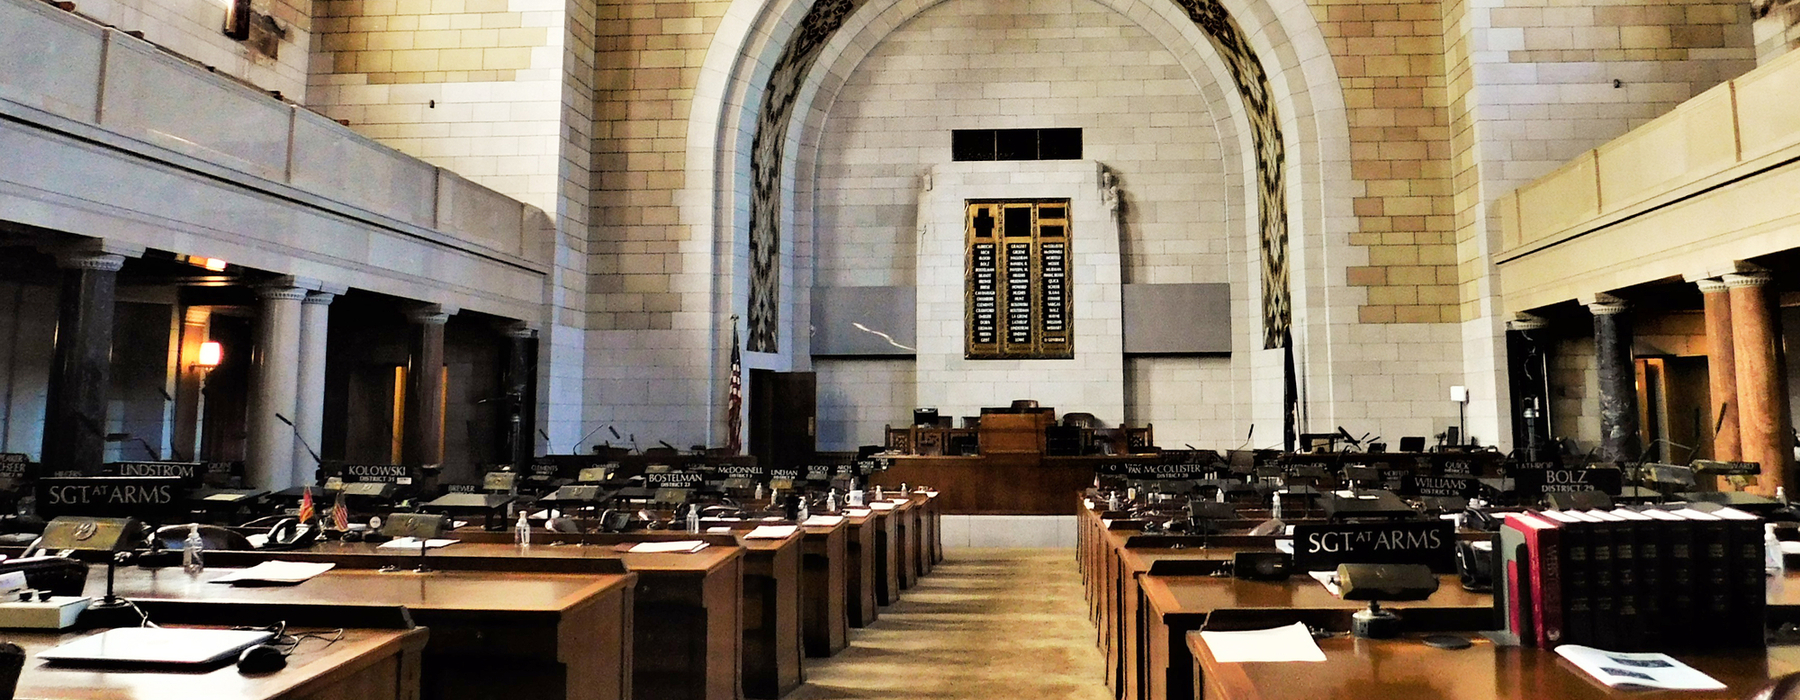 Inside the Nebraska State Capitol building; desks filling both sides with tall ceiling